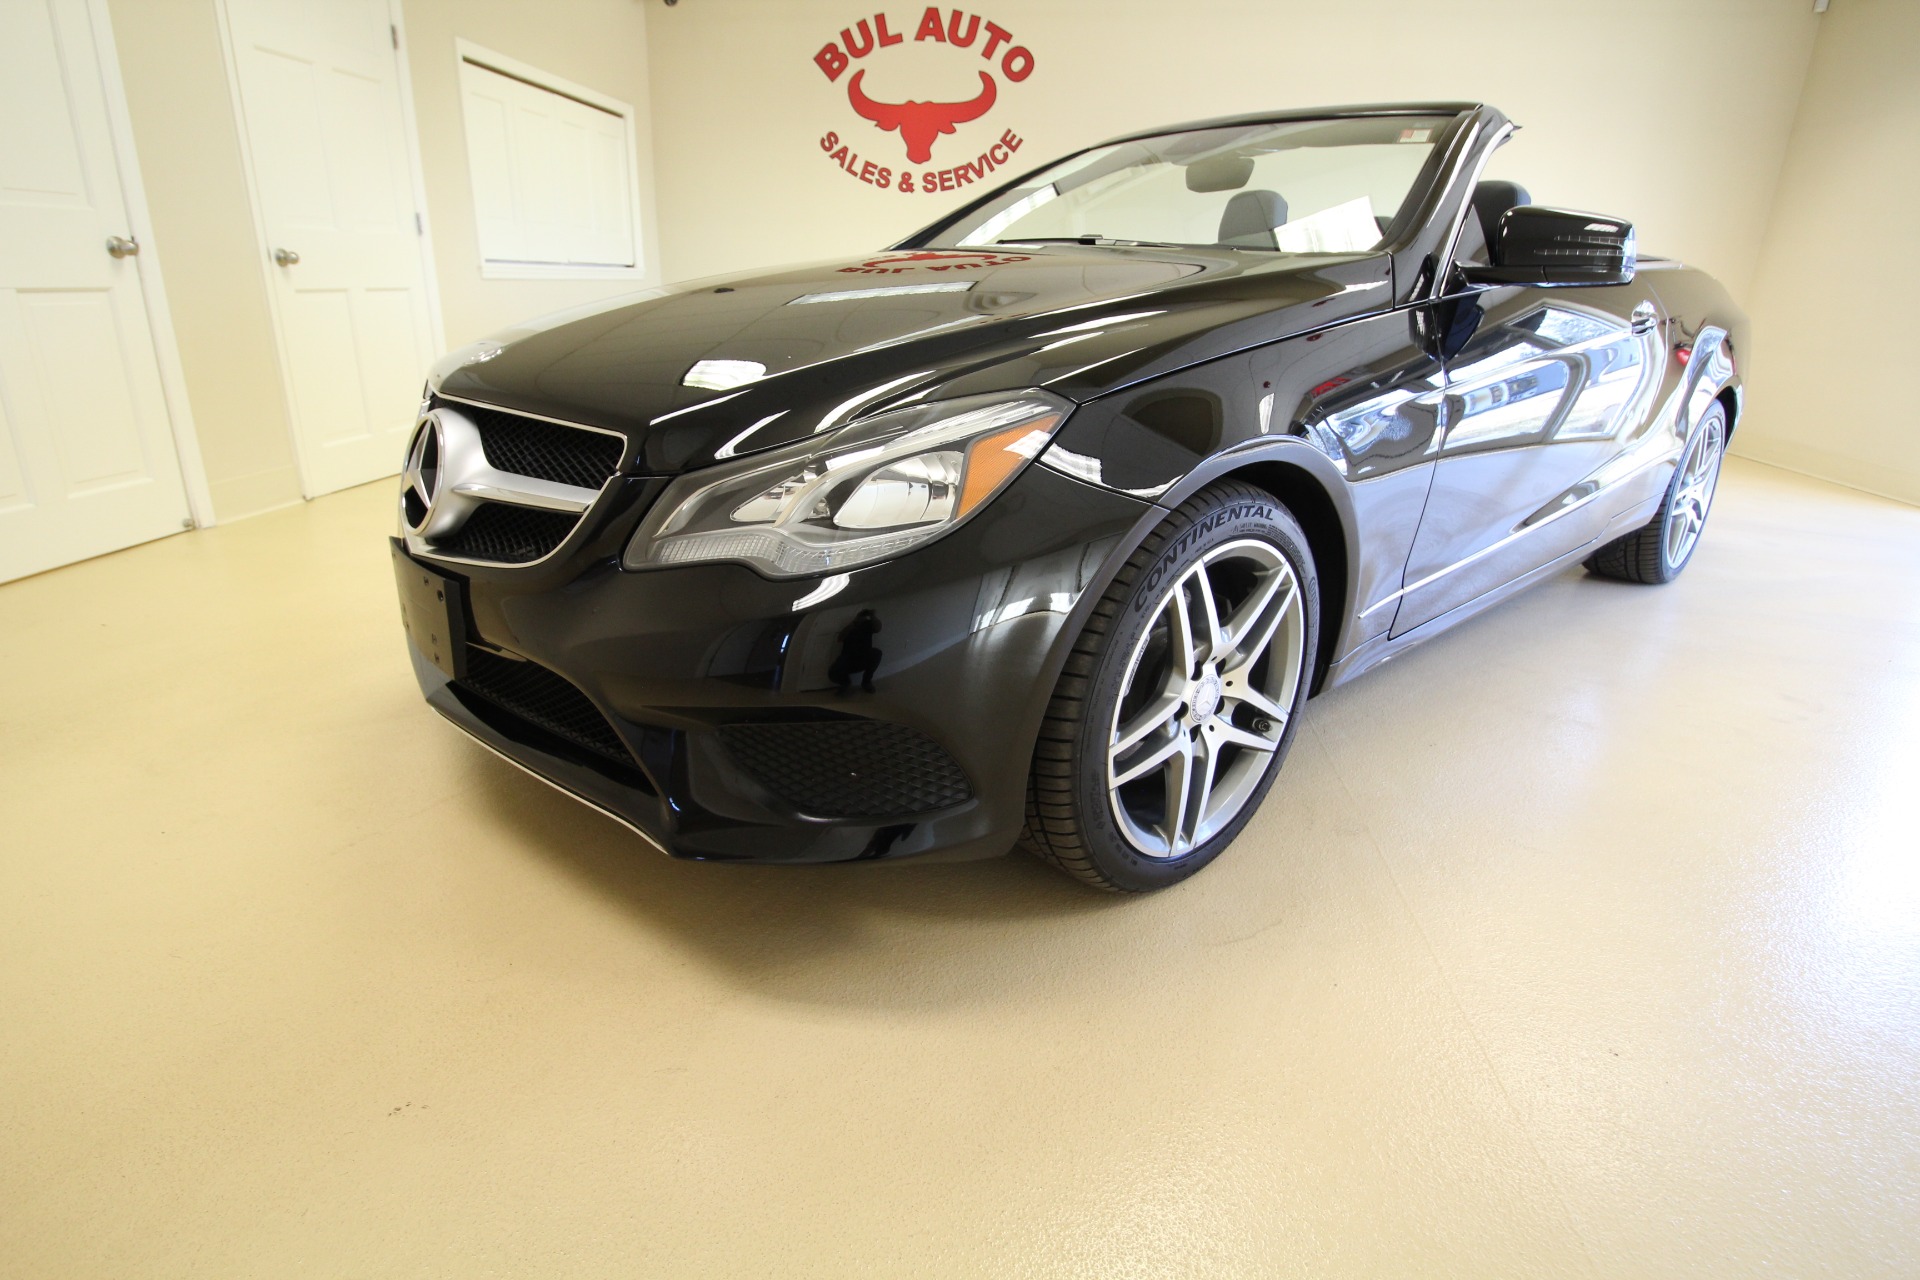 2014 Mercedes Benz E Class E350 Cabriolet Convertible Low Miles Very Clean 1 Owner Stock 20040 For Sale Near Albany Ny Ny Mercedes Benz Dealer For Sale In Albany Ny 20040 Bul Auto Sales